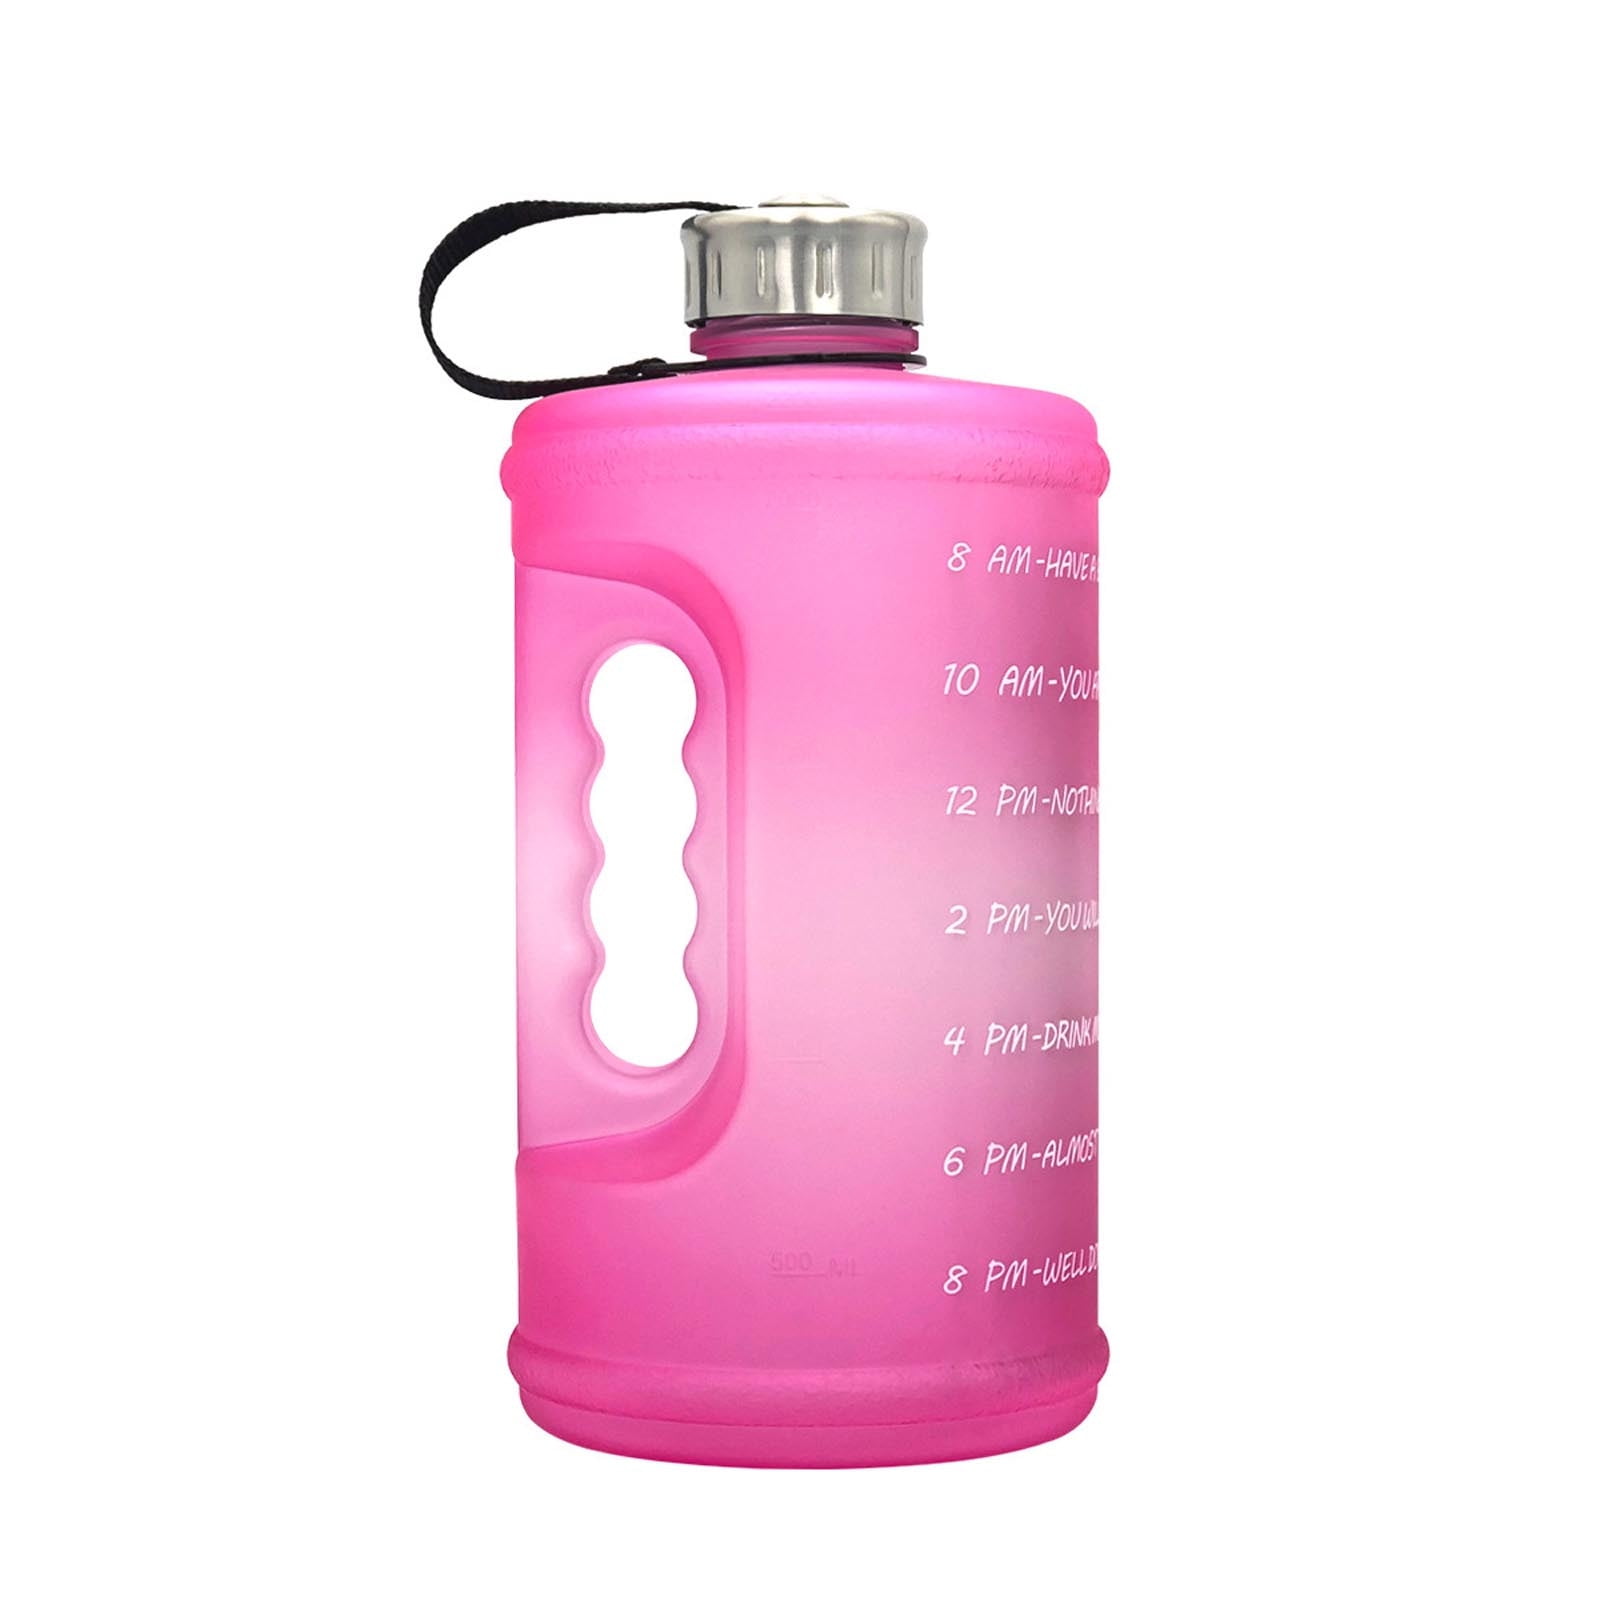 CALIFORNIA BIKE GEAR EXTREME 26oz FROSTED CLEAR WATER BOTTLE 